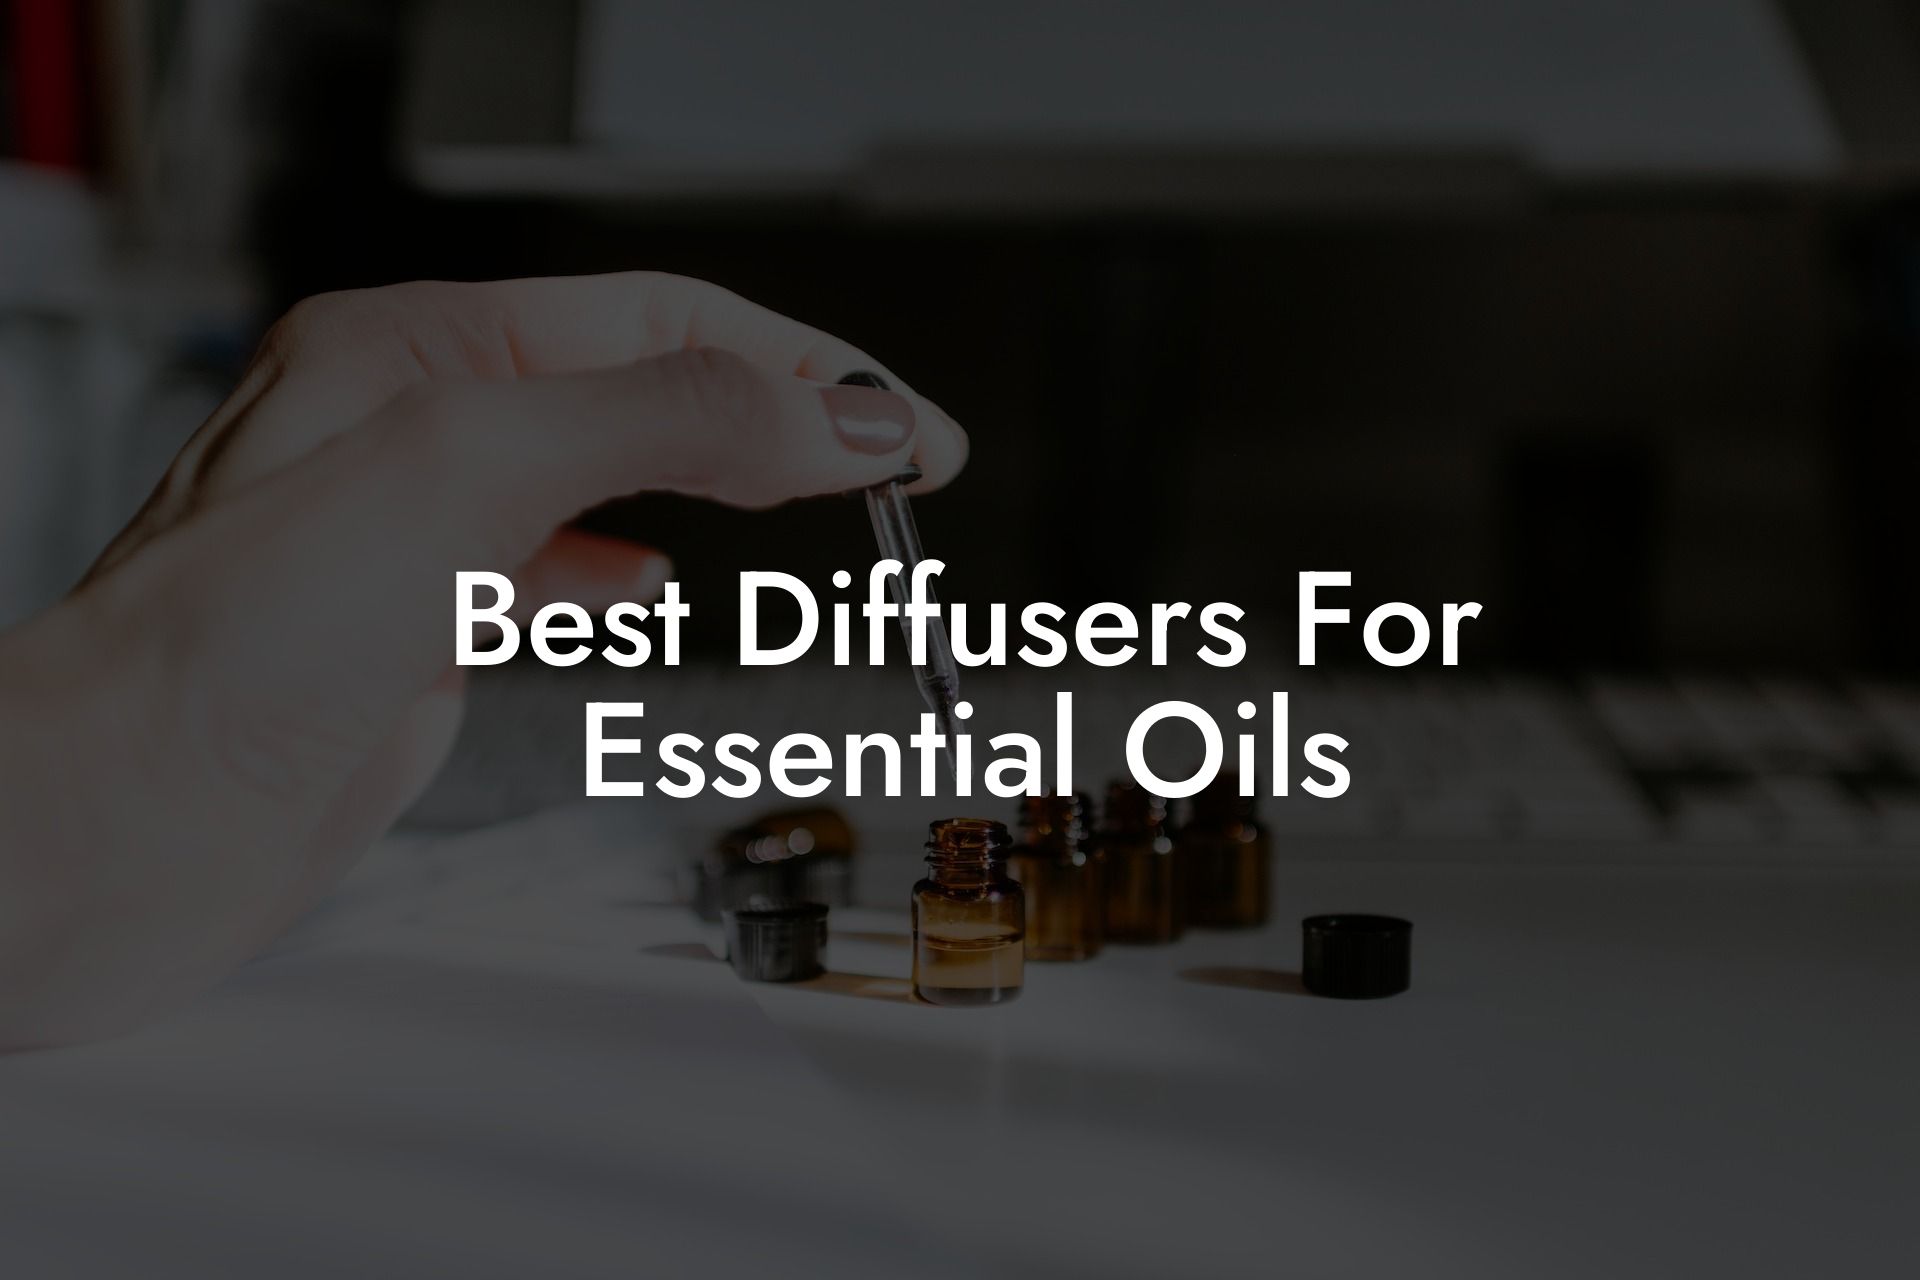 Best Diffusers For Essential Oils